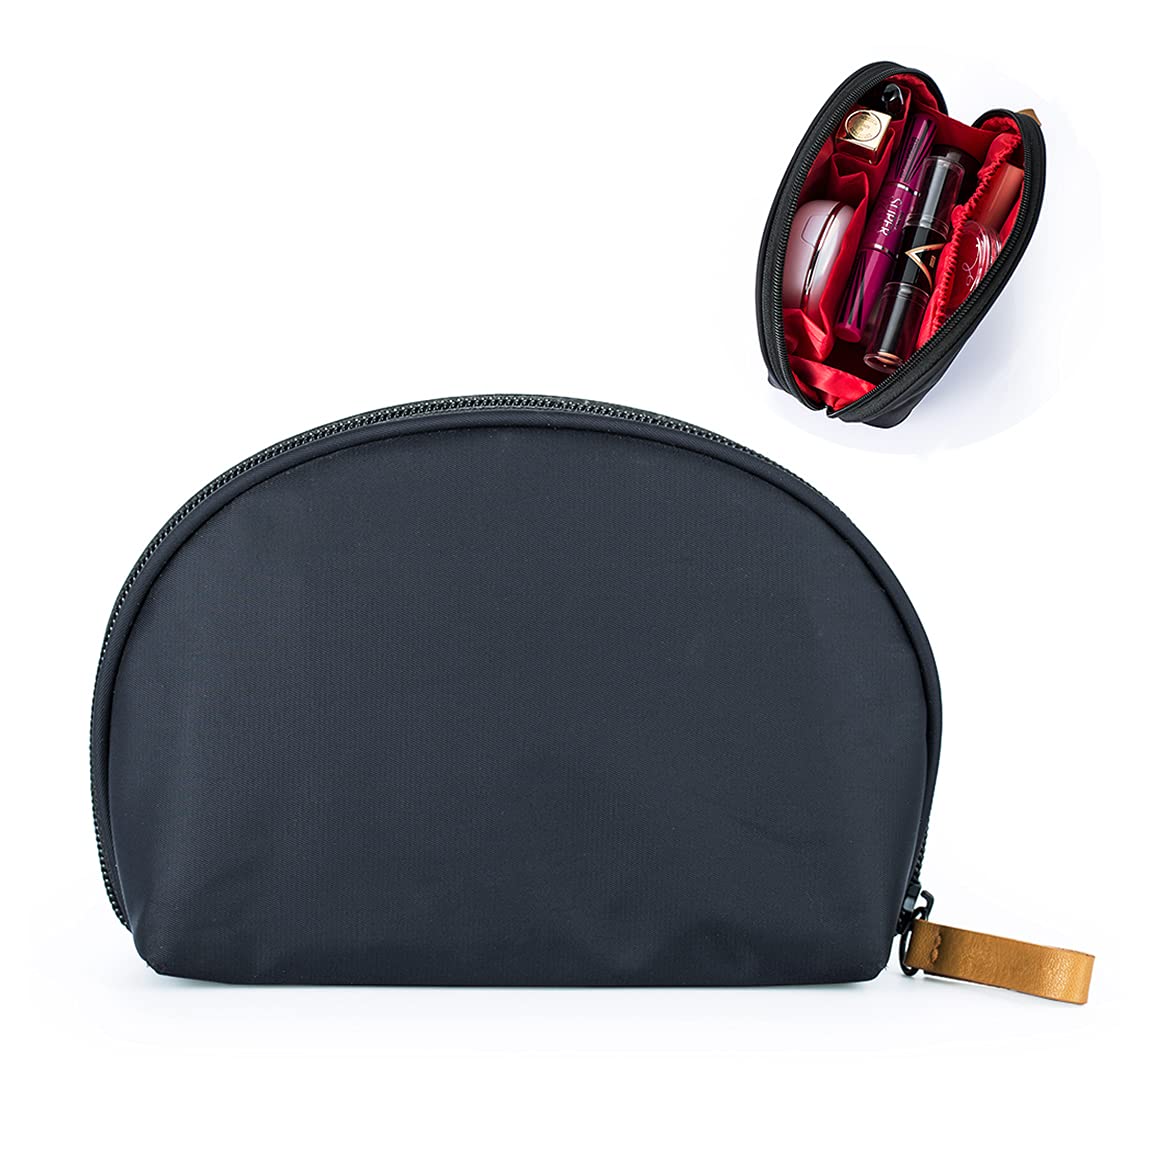 Vorspack Makeup Bag Small Travel Cosmetic Bag, PU Leather Mini